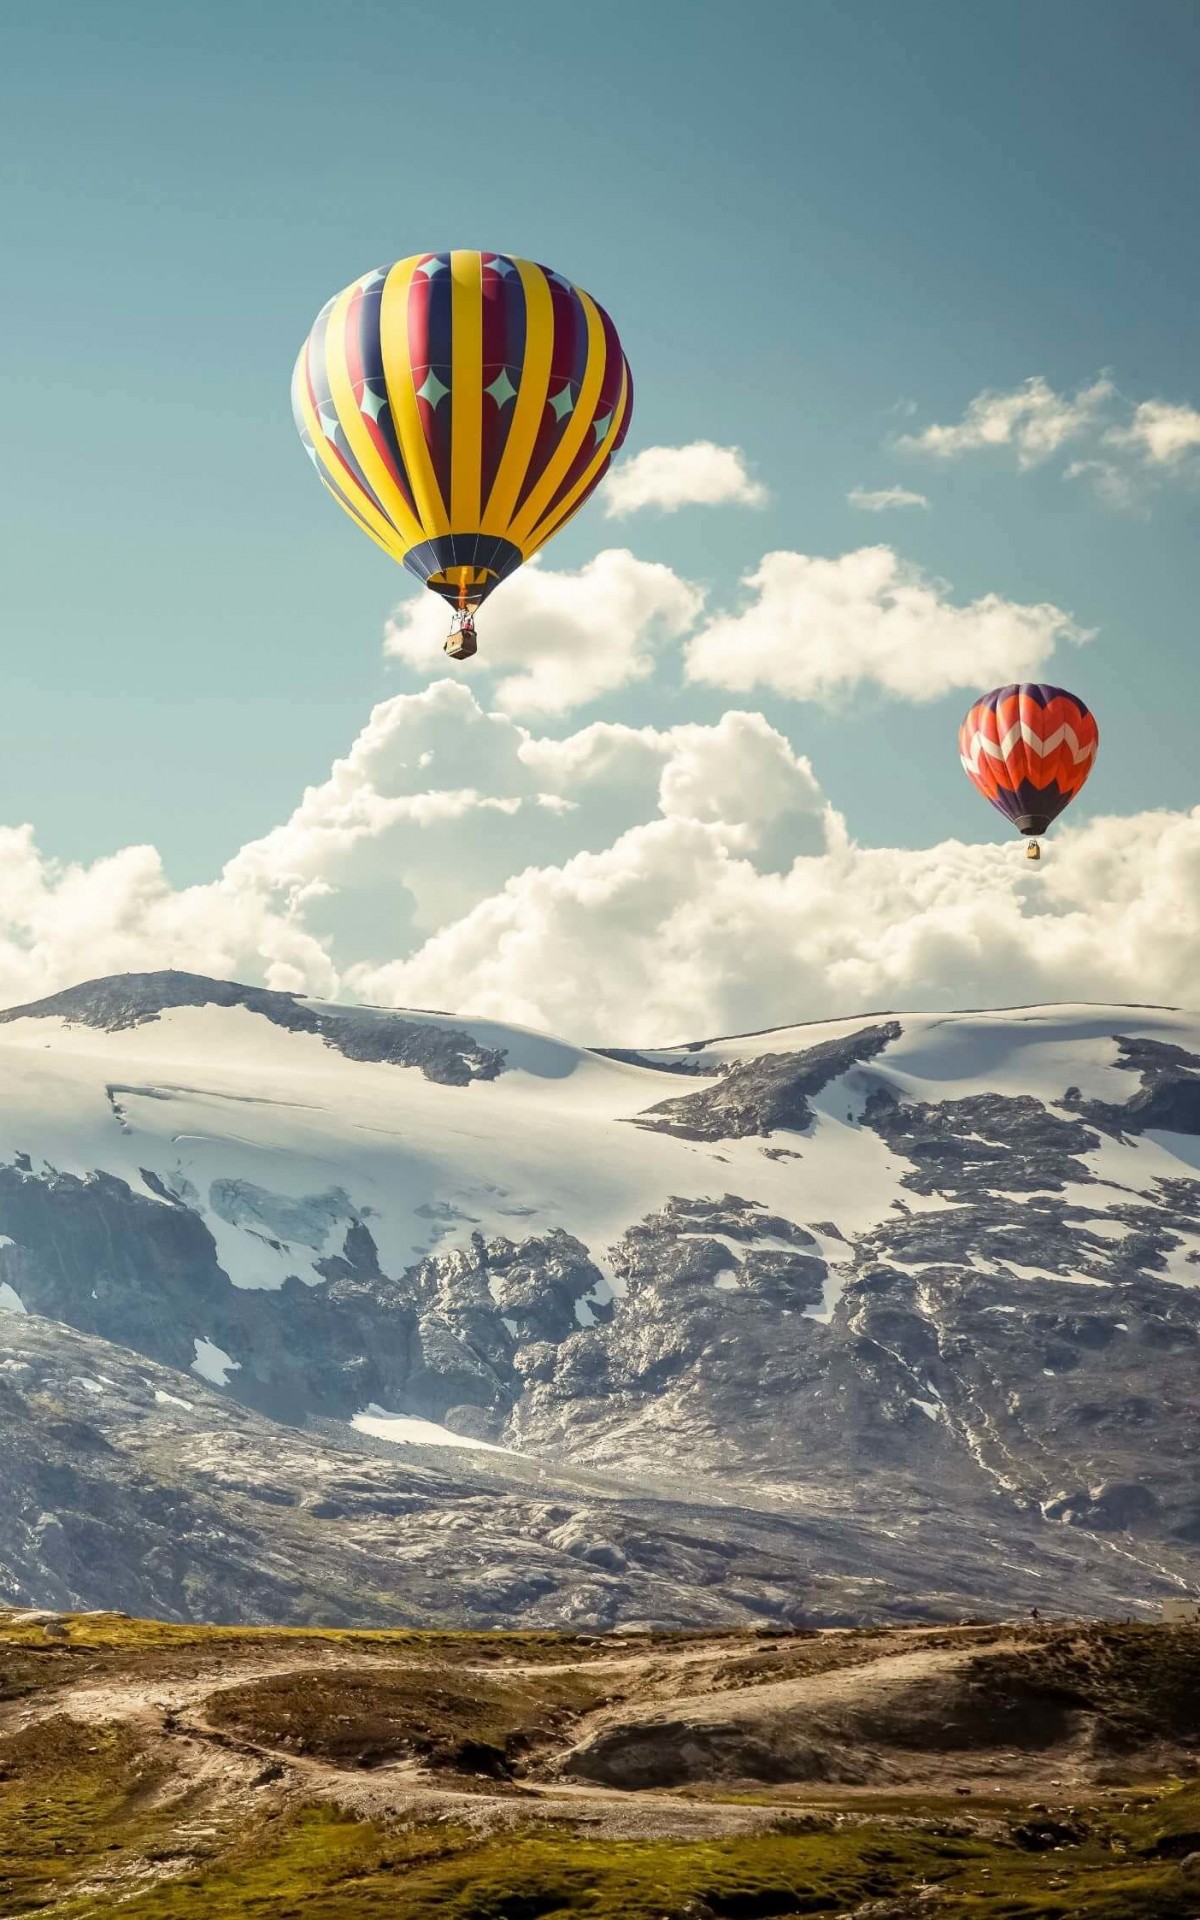 Hot Air Balloon Over the Mountain Wallpaper for Amazon Kindle Fire HDX